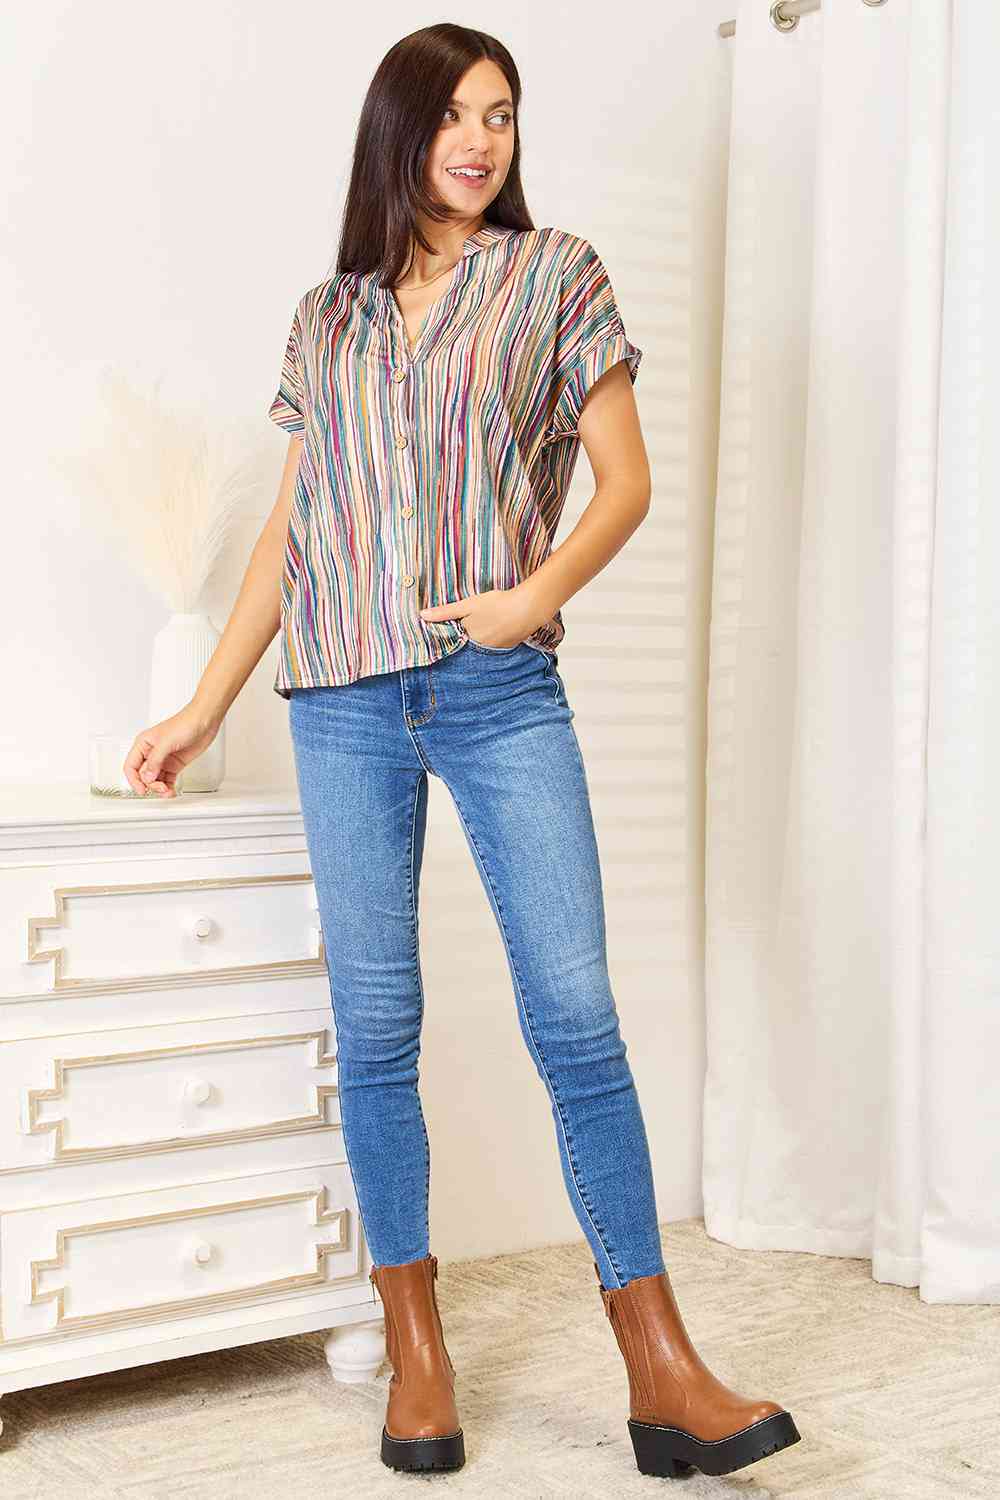 Double Take Multicolored Stripe Notched Neck Top No 8